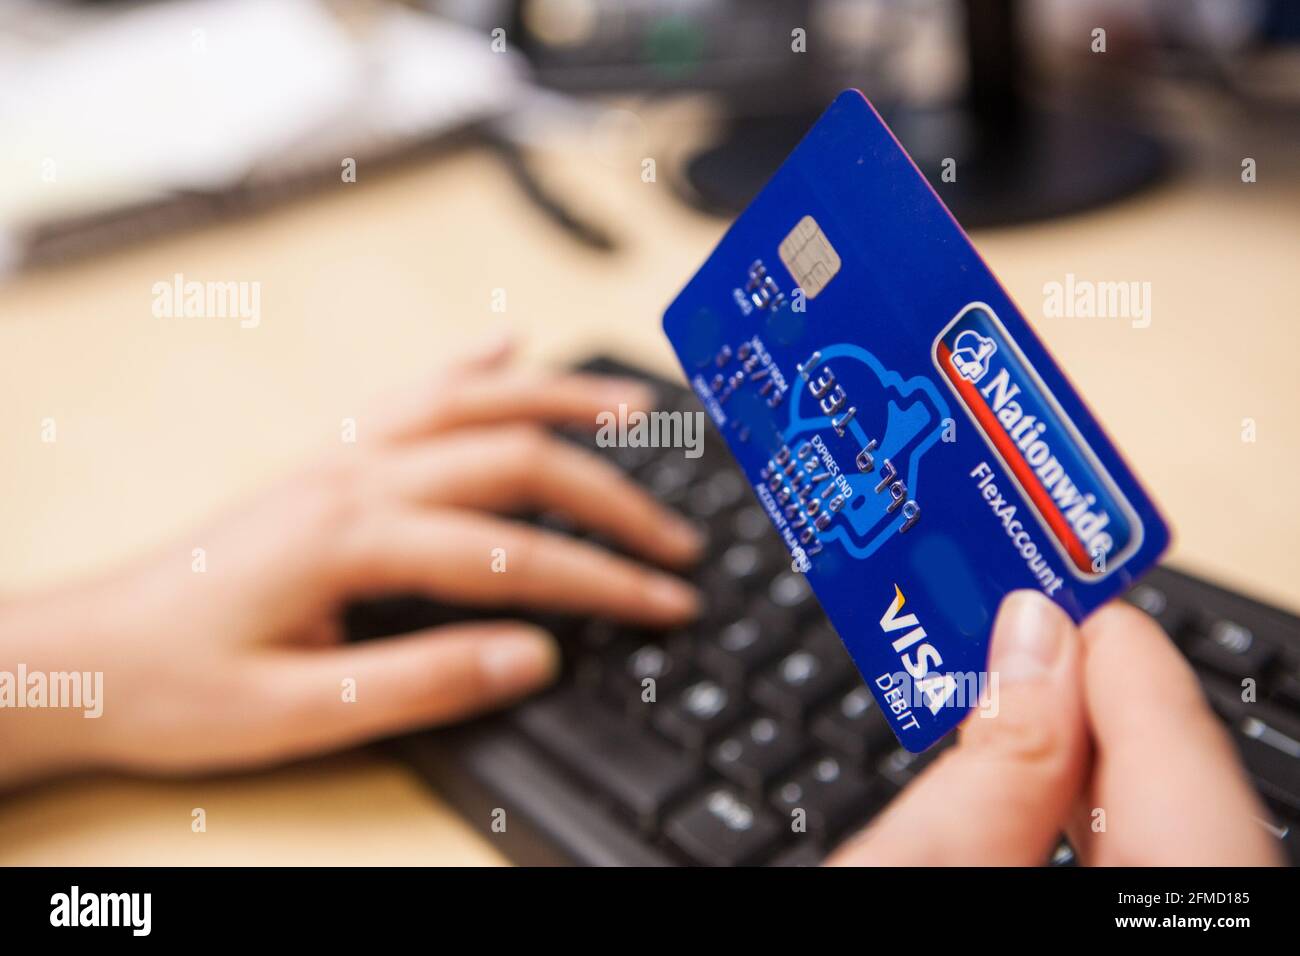 Online credit card purchase Stock Photo